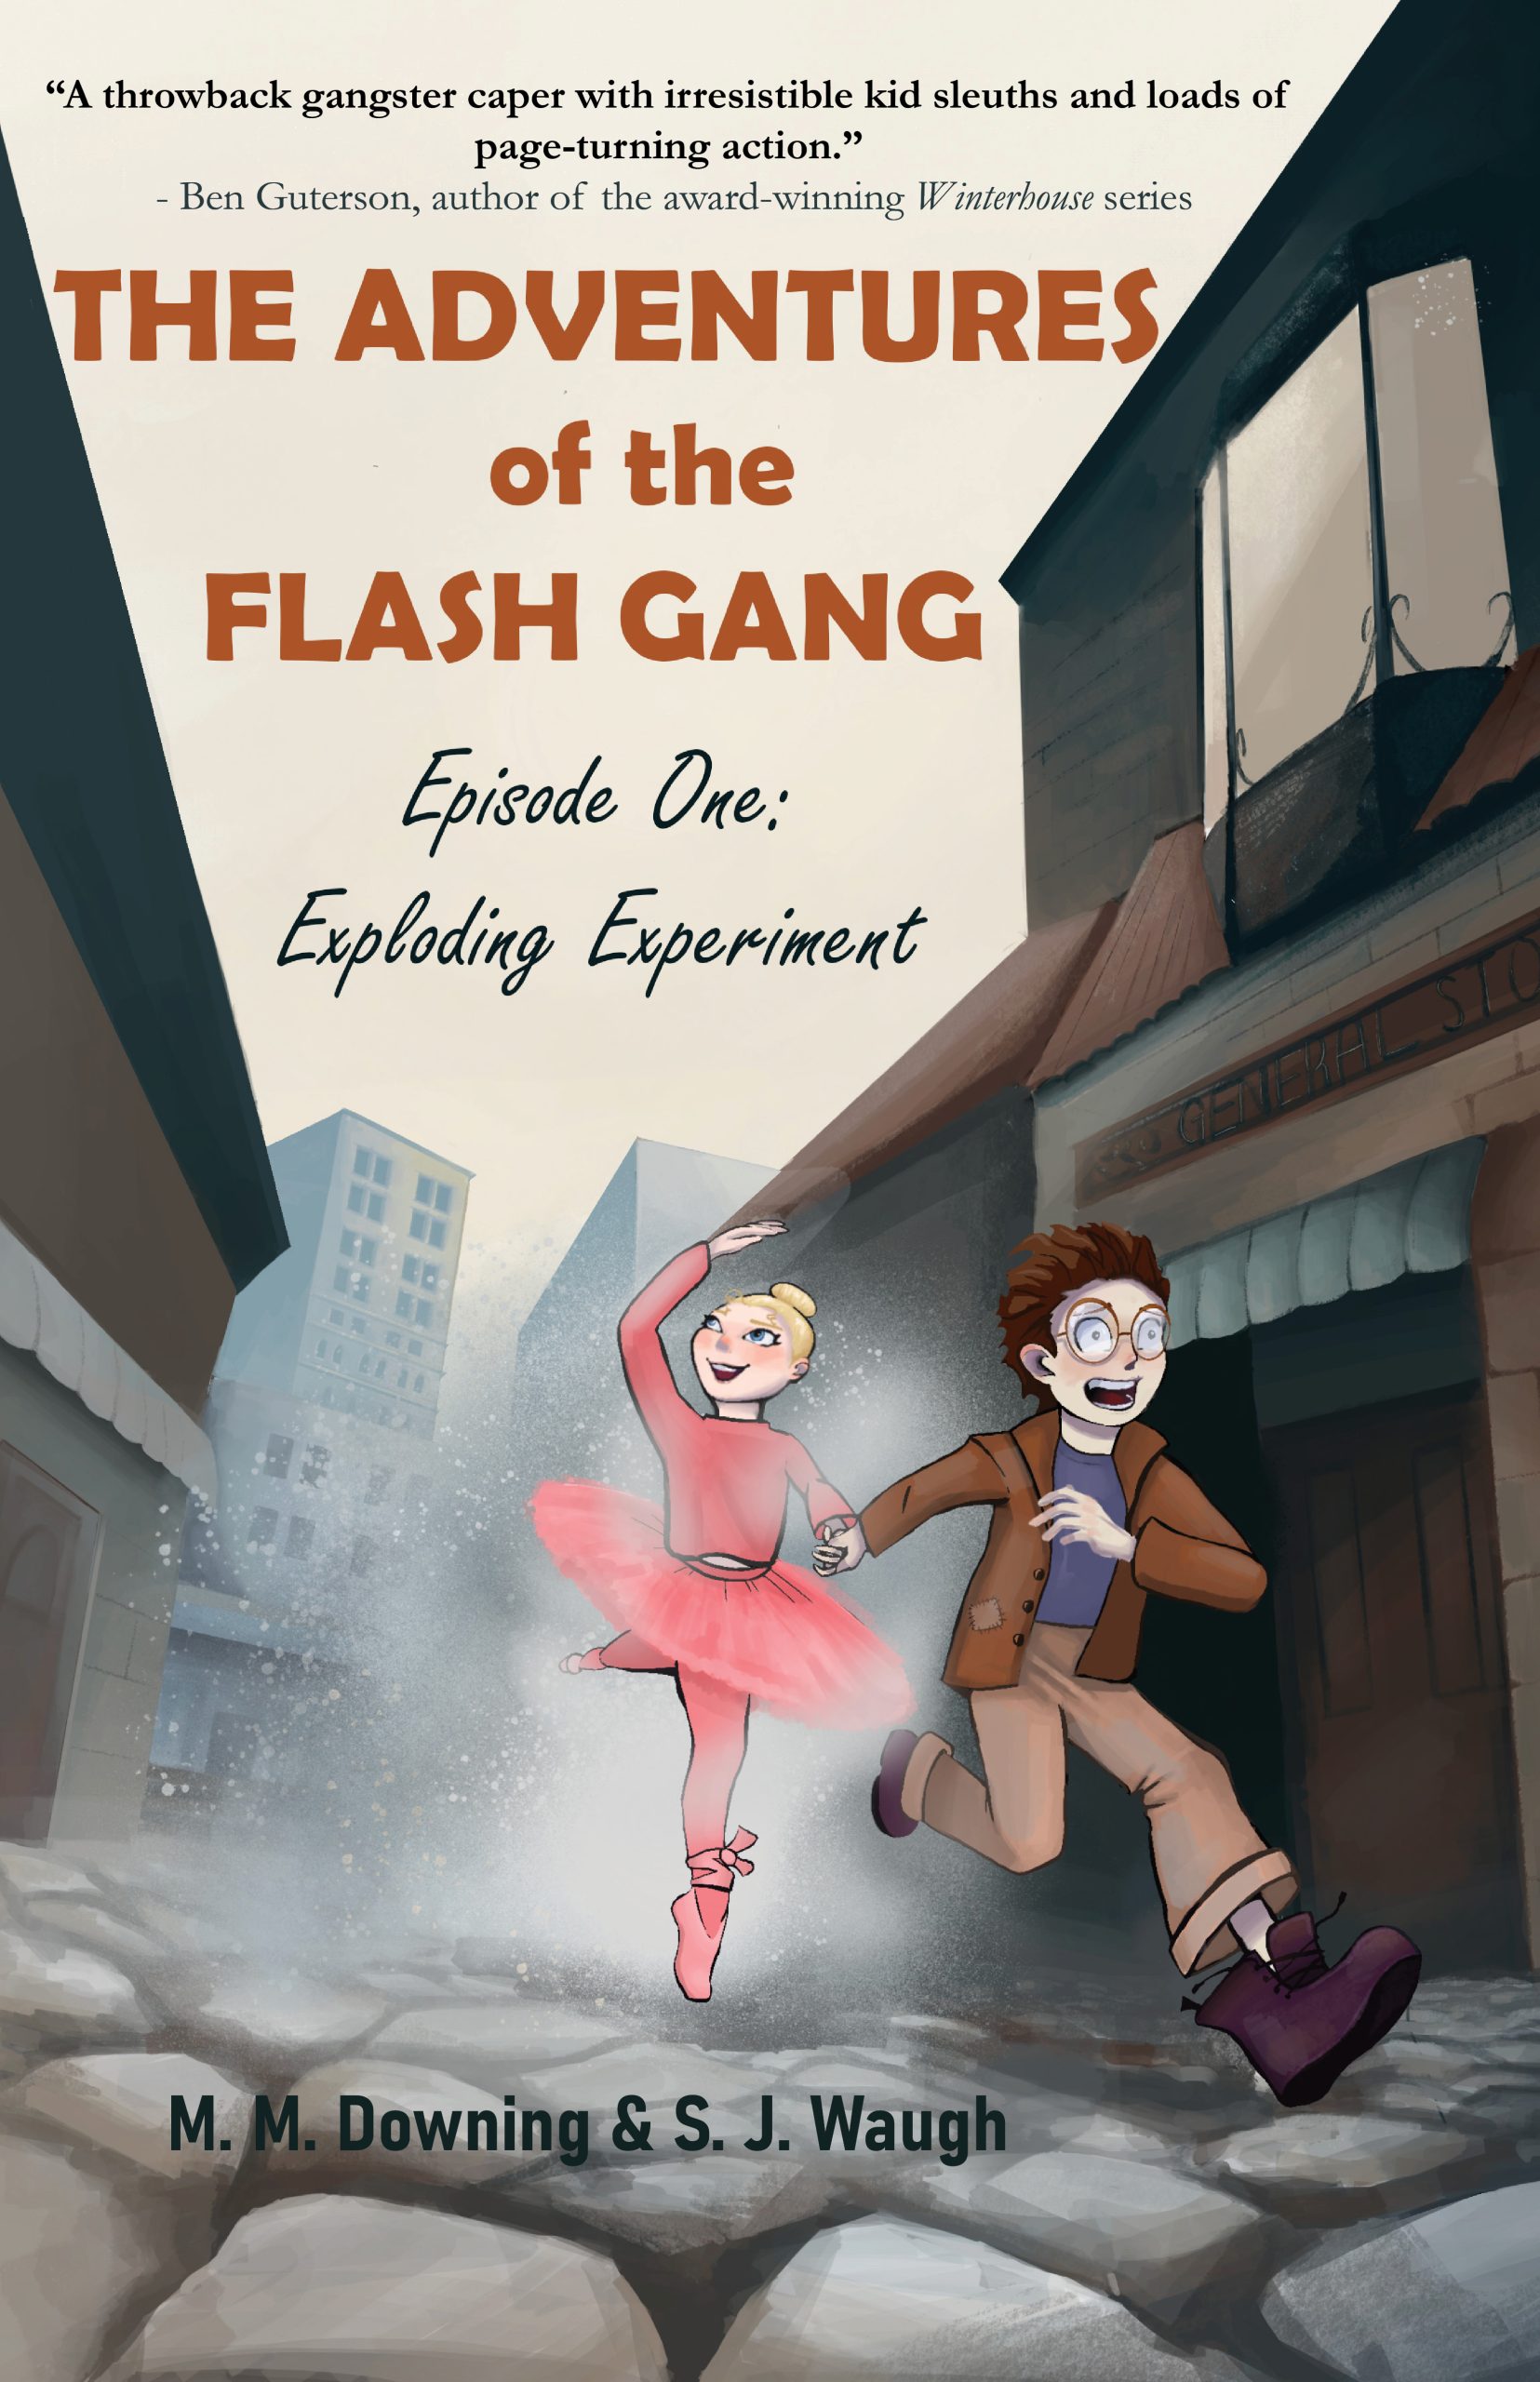 Cover Reveal: THE ADVENTURES OF THE FLASH GANG Episode One: Exploding Experiment (M.M. Downing & S.J. Waugh), Plus Giveaway! ~US ONLY